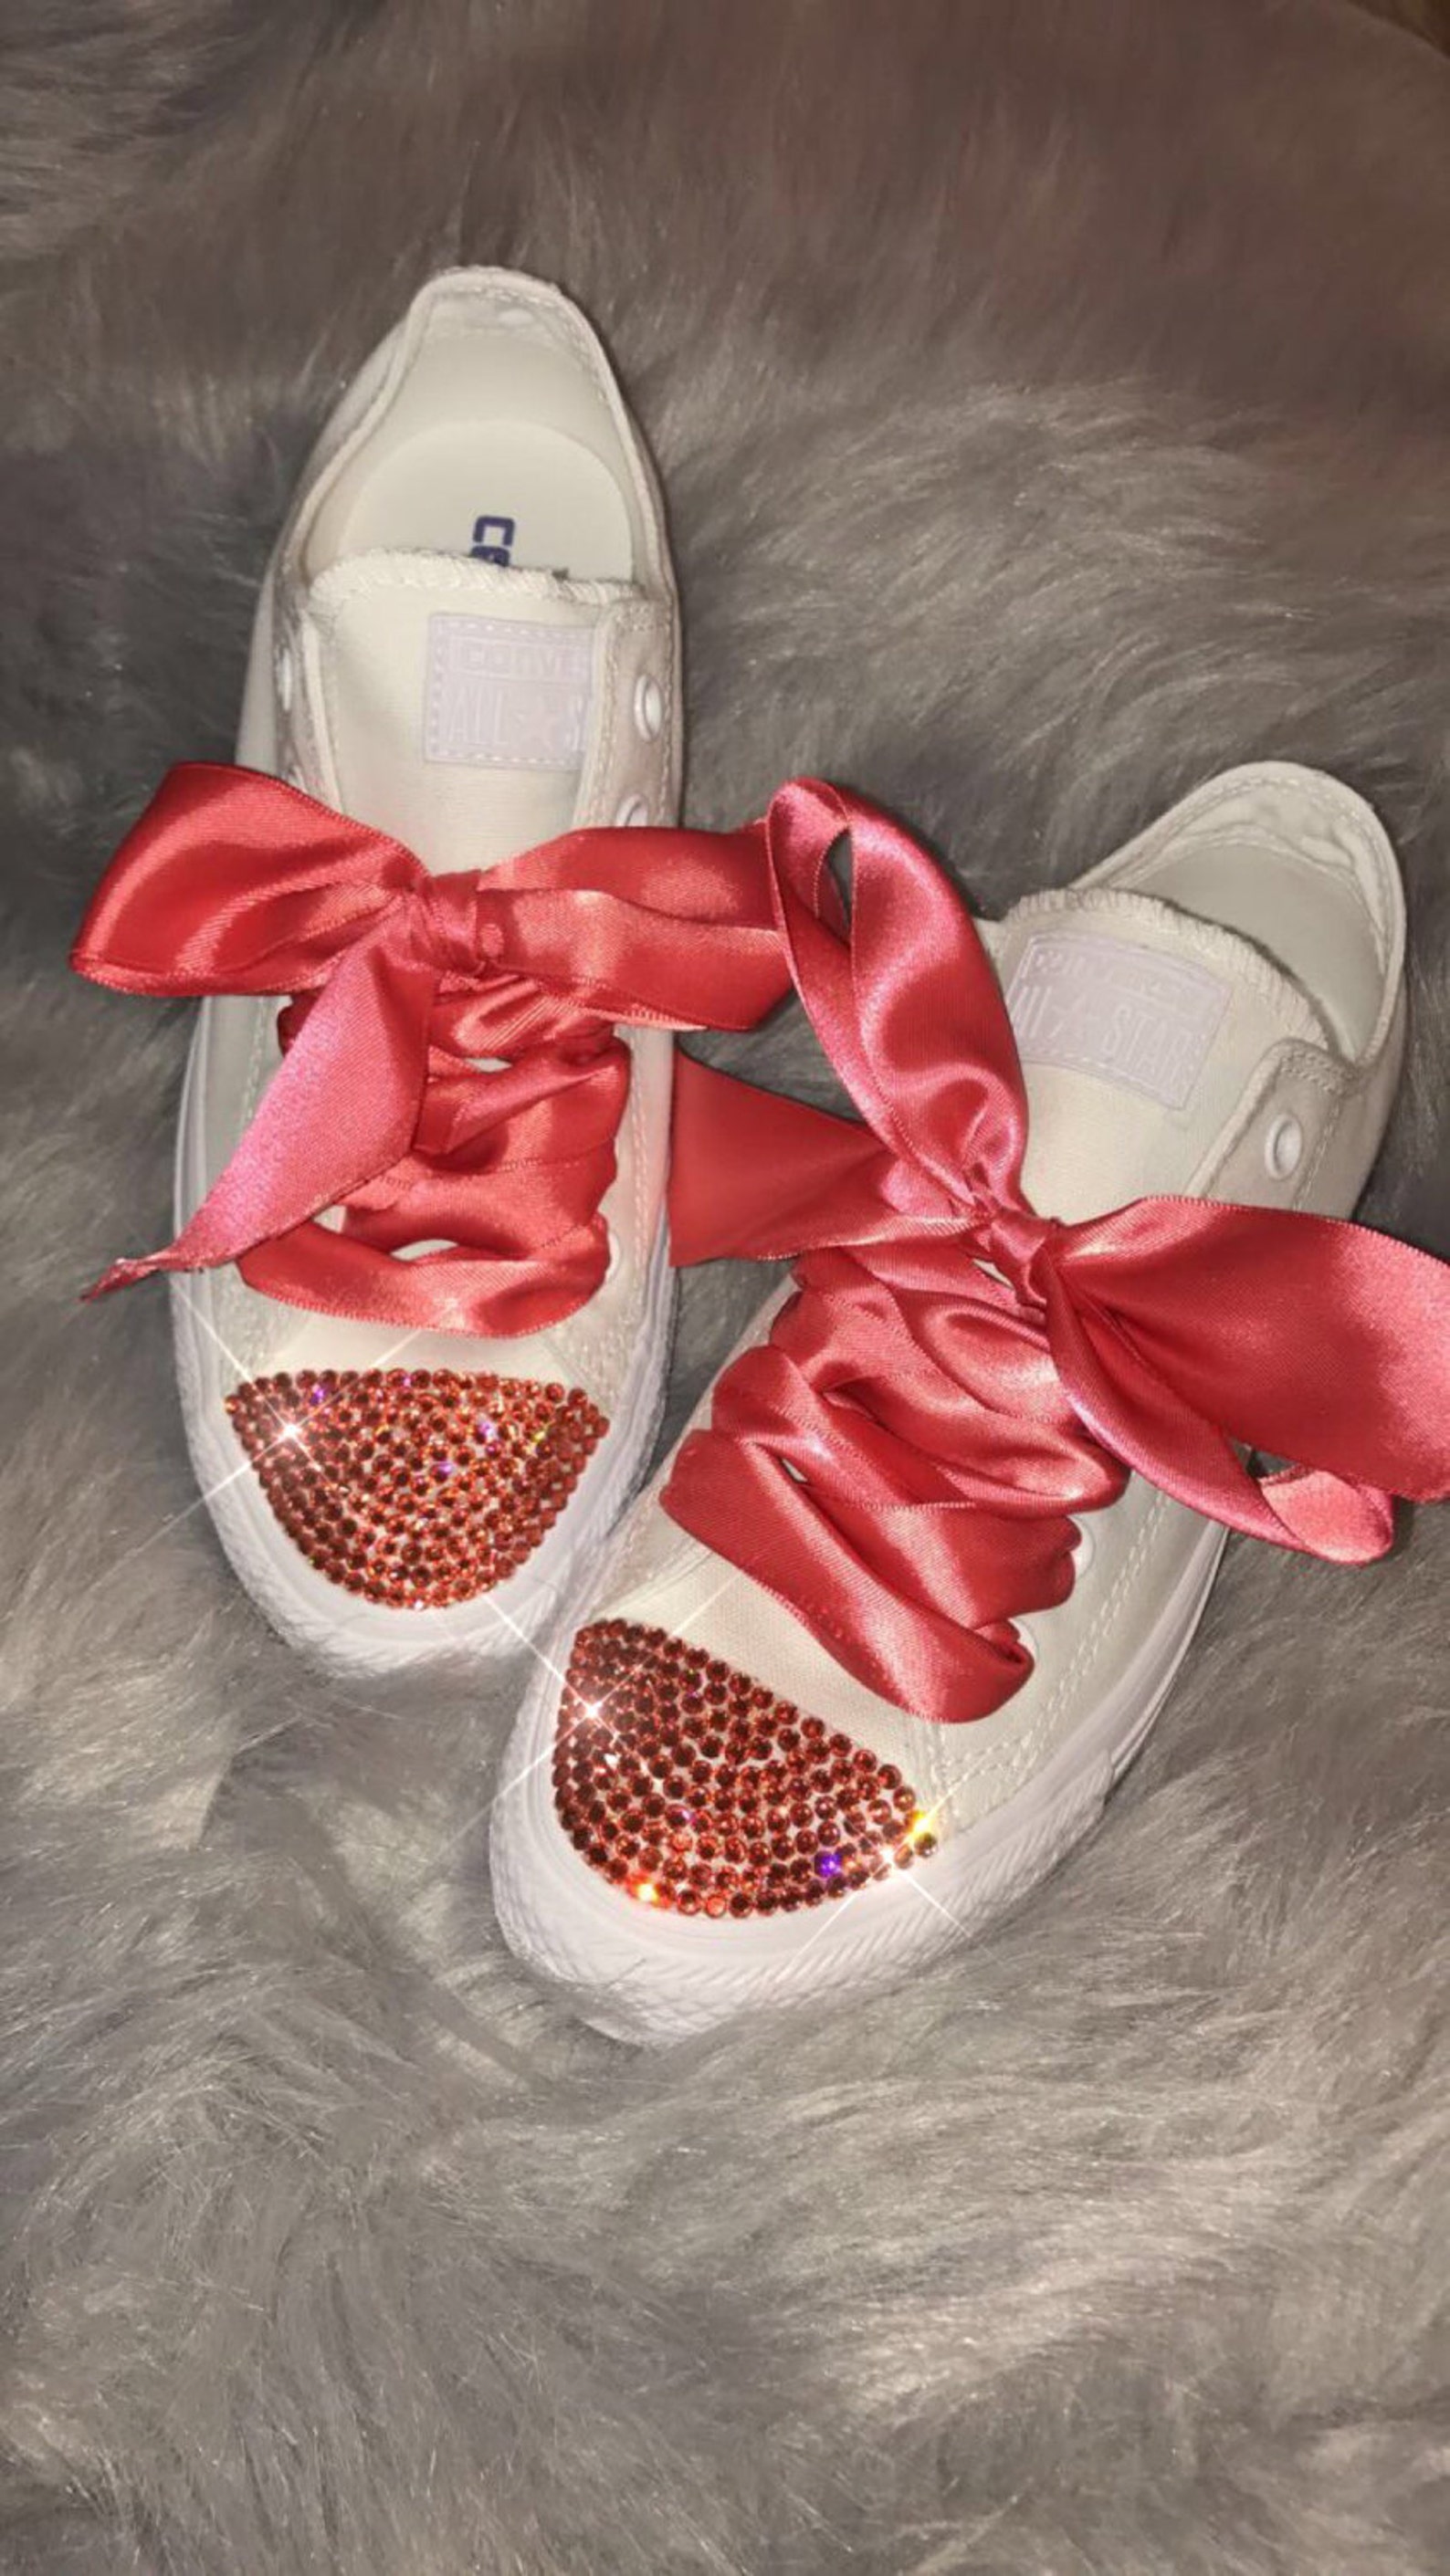 WEDDING CONVERSE Reception prom engagement party | Etsy